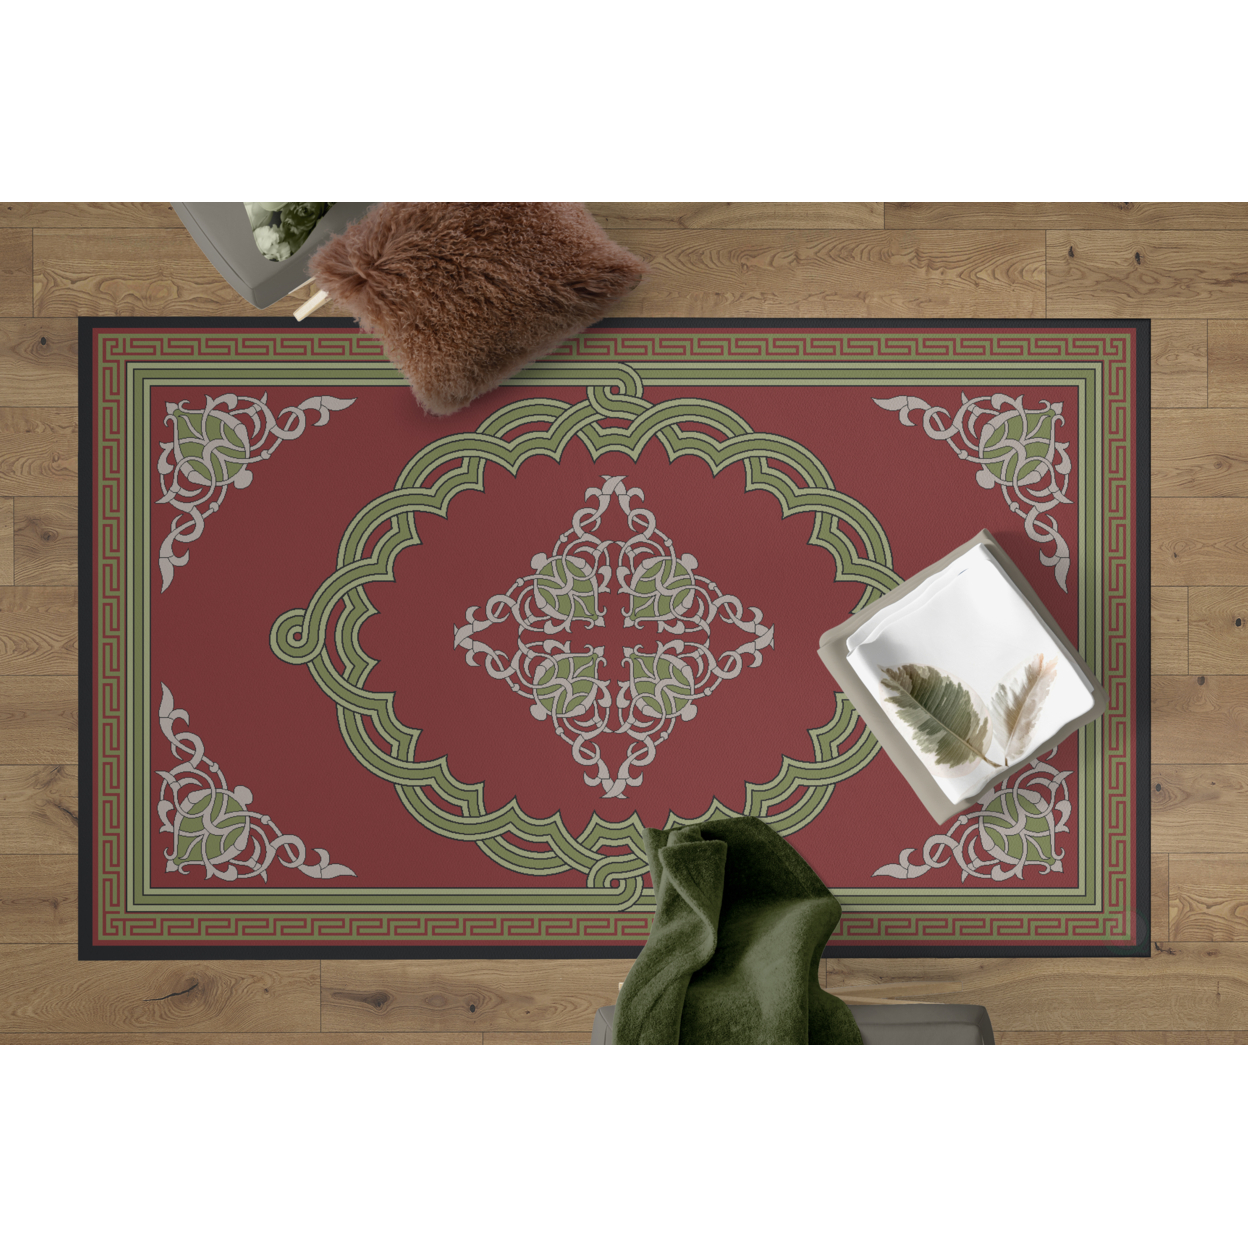 Deerlux Transitional Living Room Area Rug With Nonslip Backing, Red Medallion Pattern - 3 X 5